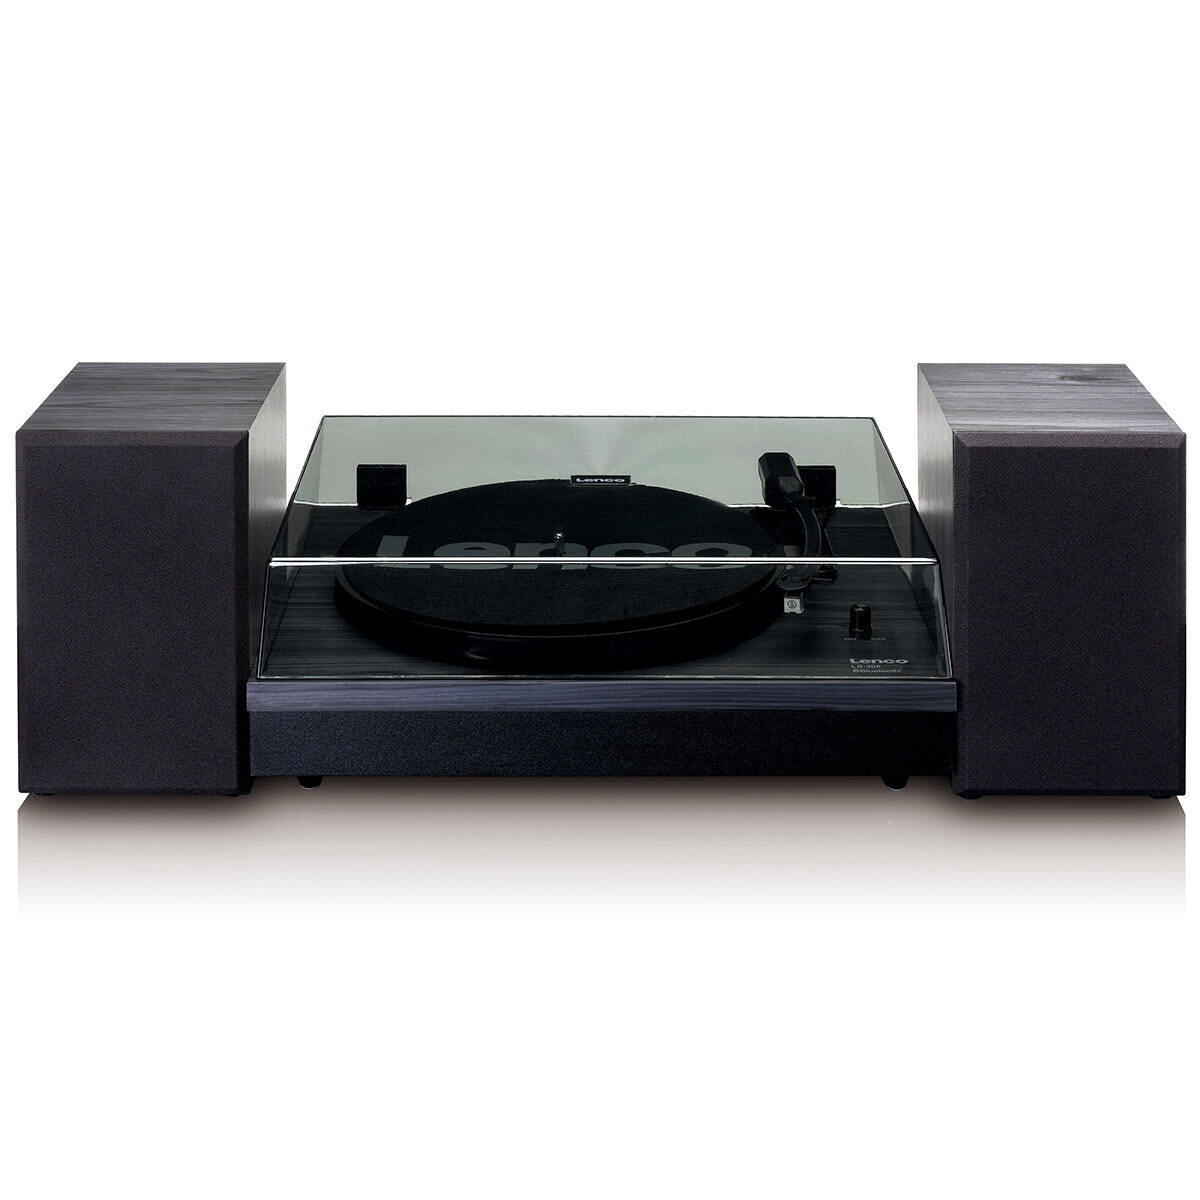 Lenco LS-300BK Turntable Music System with Two Separate Speakers, MMC Cartridge in Black